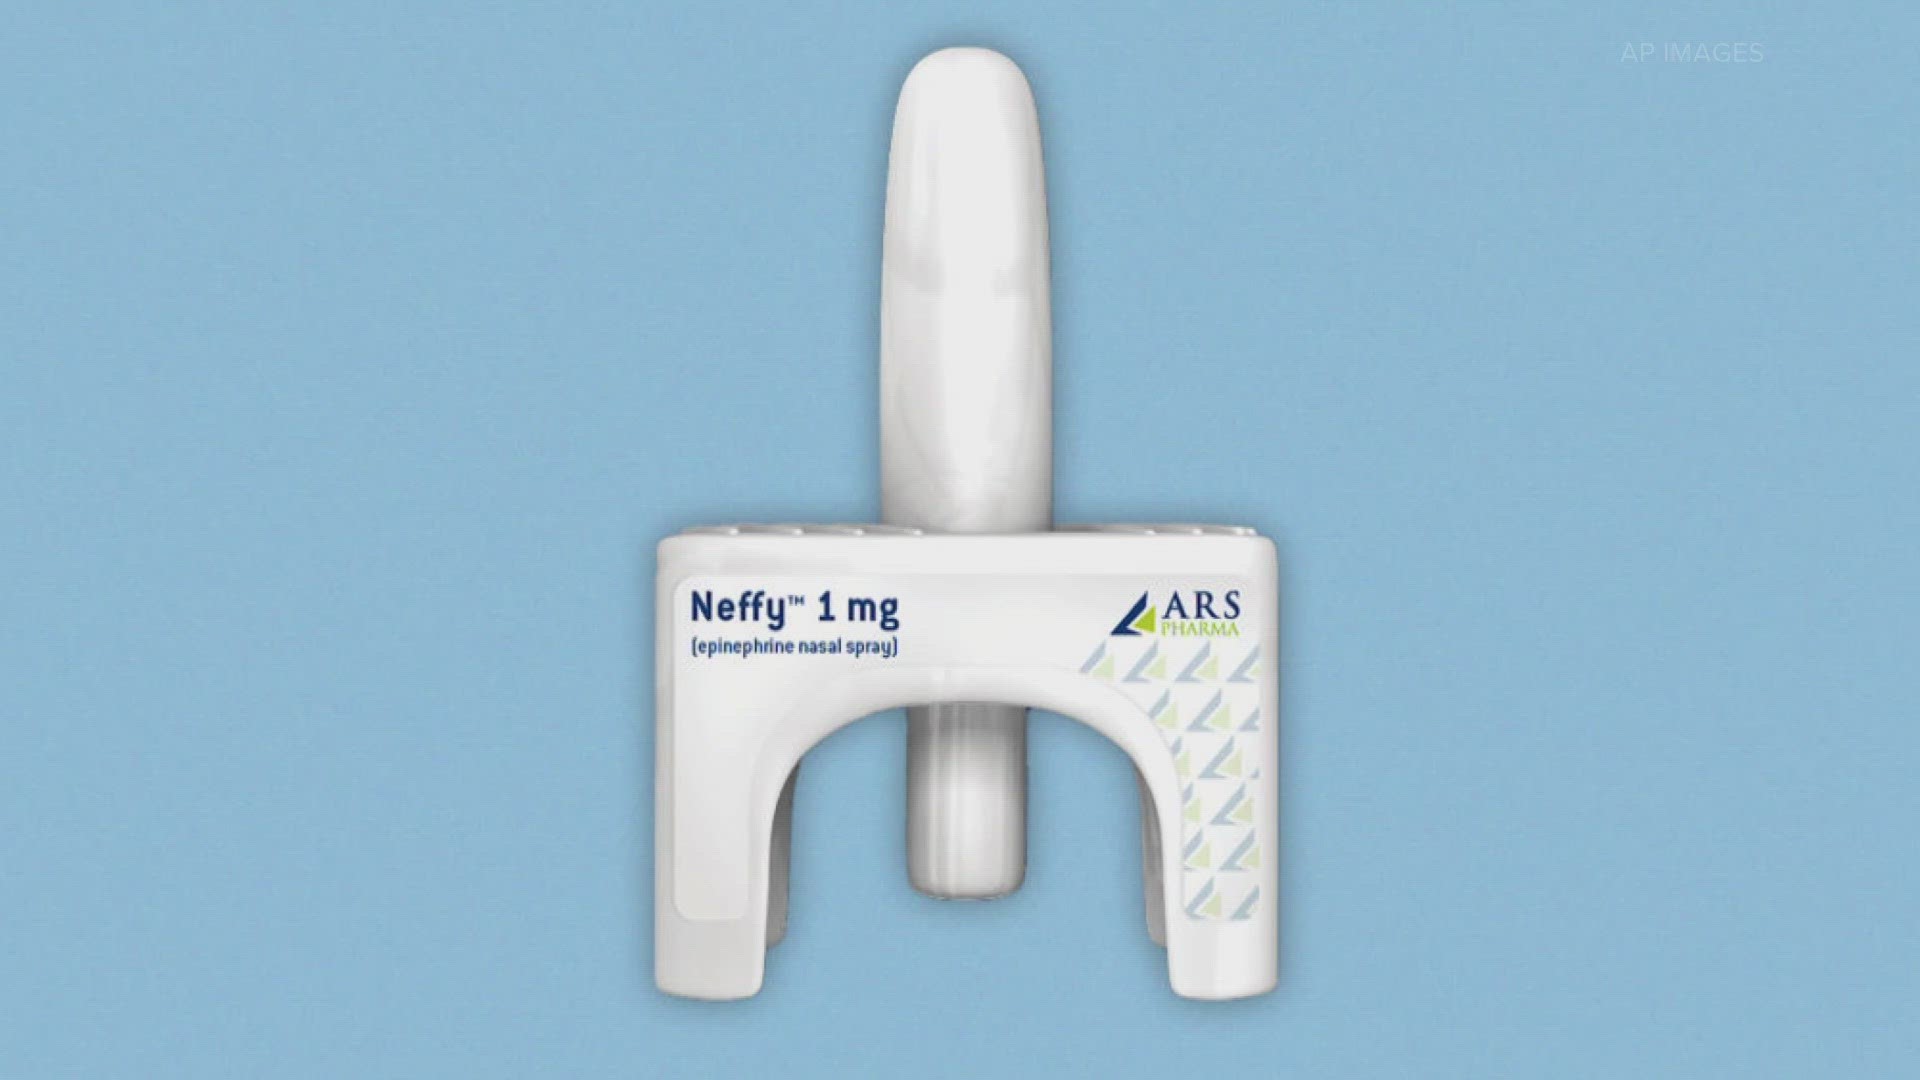 The FDA has rejected "Neffy", a nasal spray which could have been used to help treat allergic reactions.